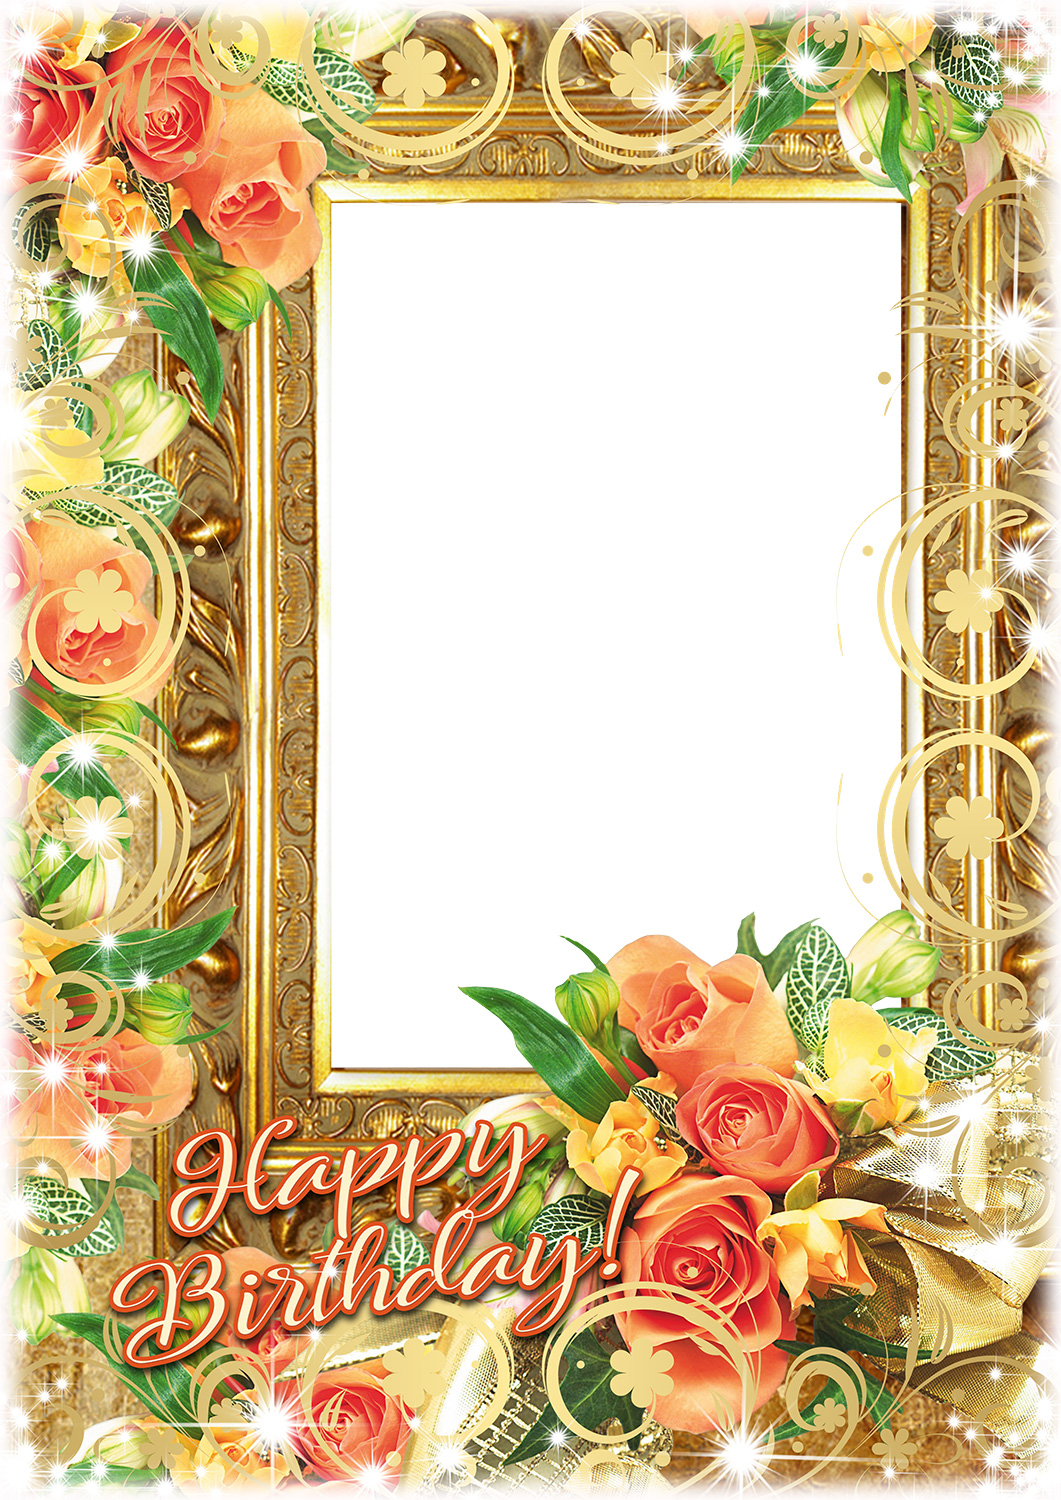 Birthday Frame With A Bunch Of Flowers Birthday Frames With Flowers